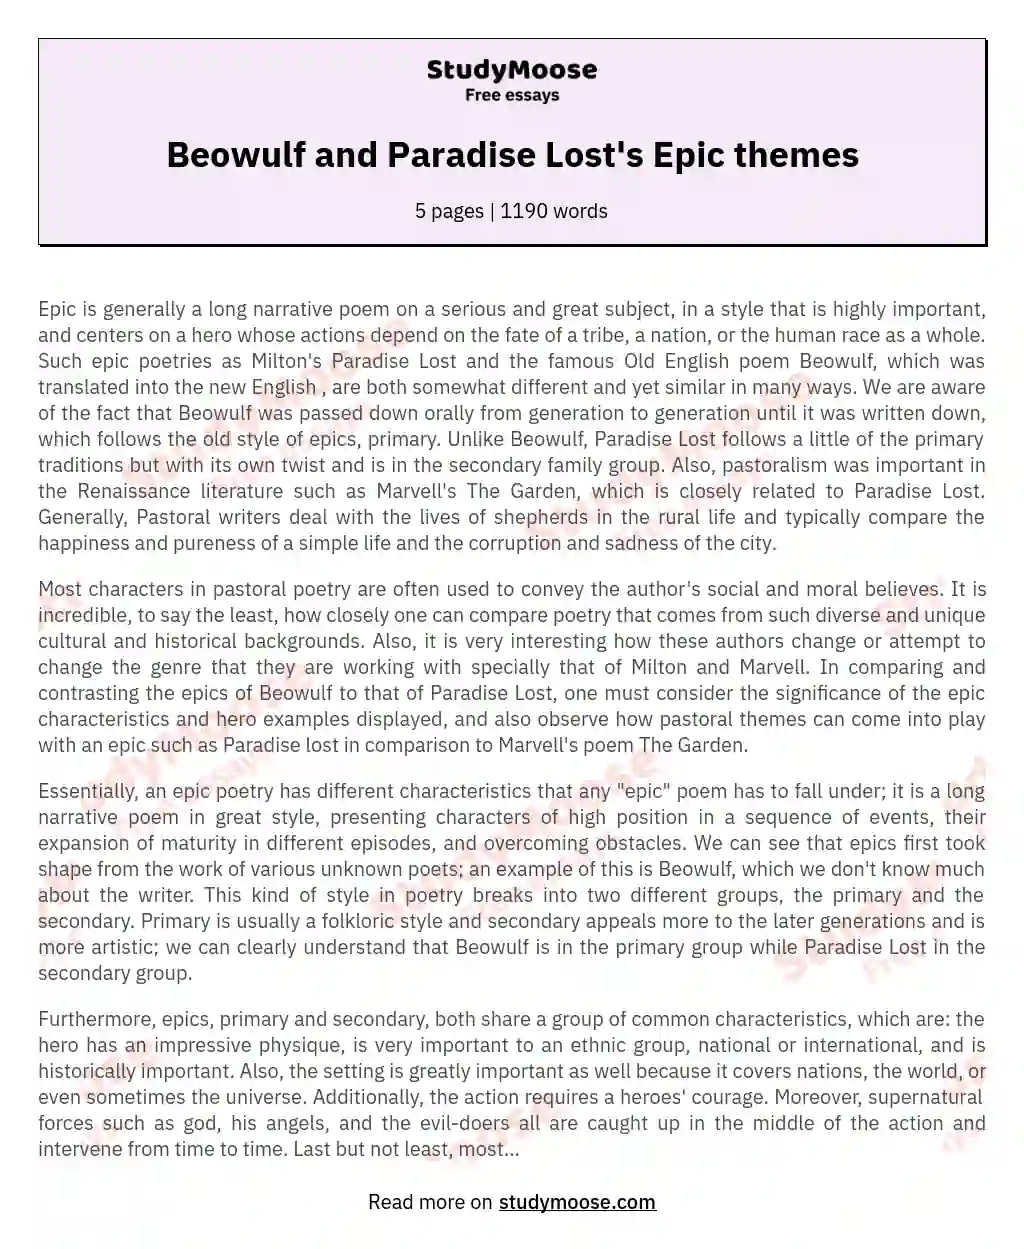 Beowulf and Paradise Lost's Epic themes